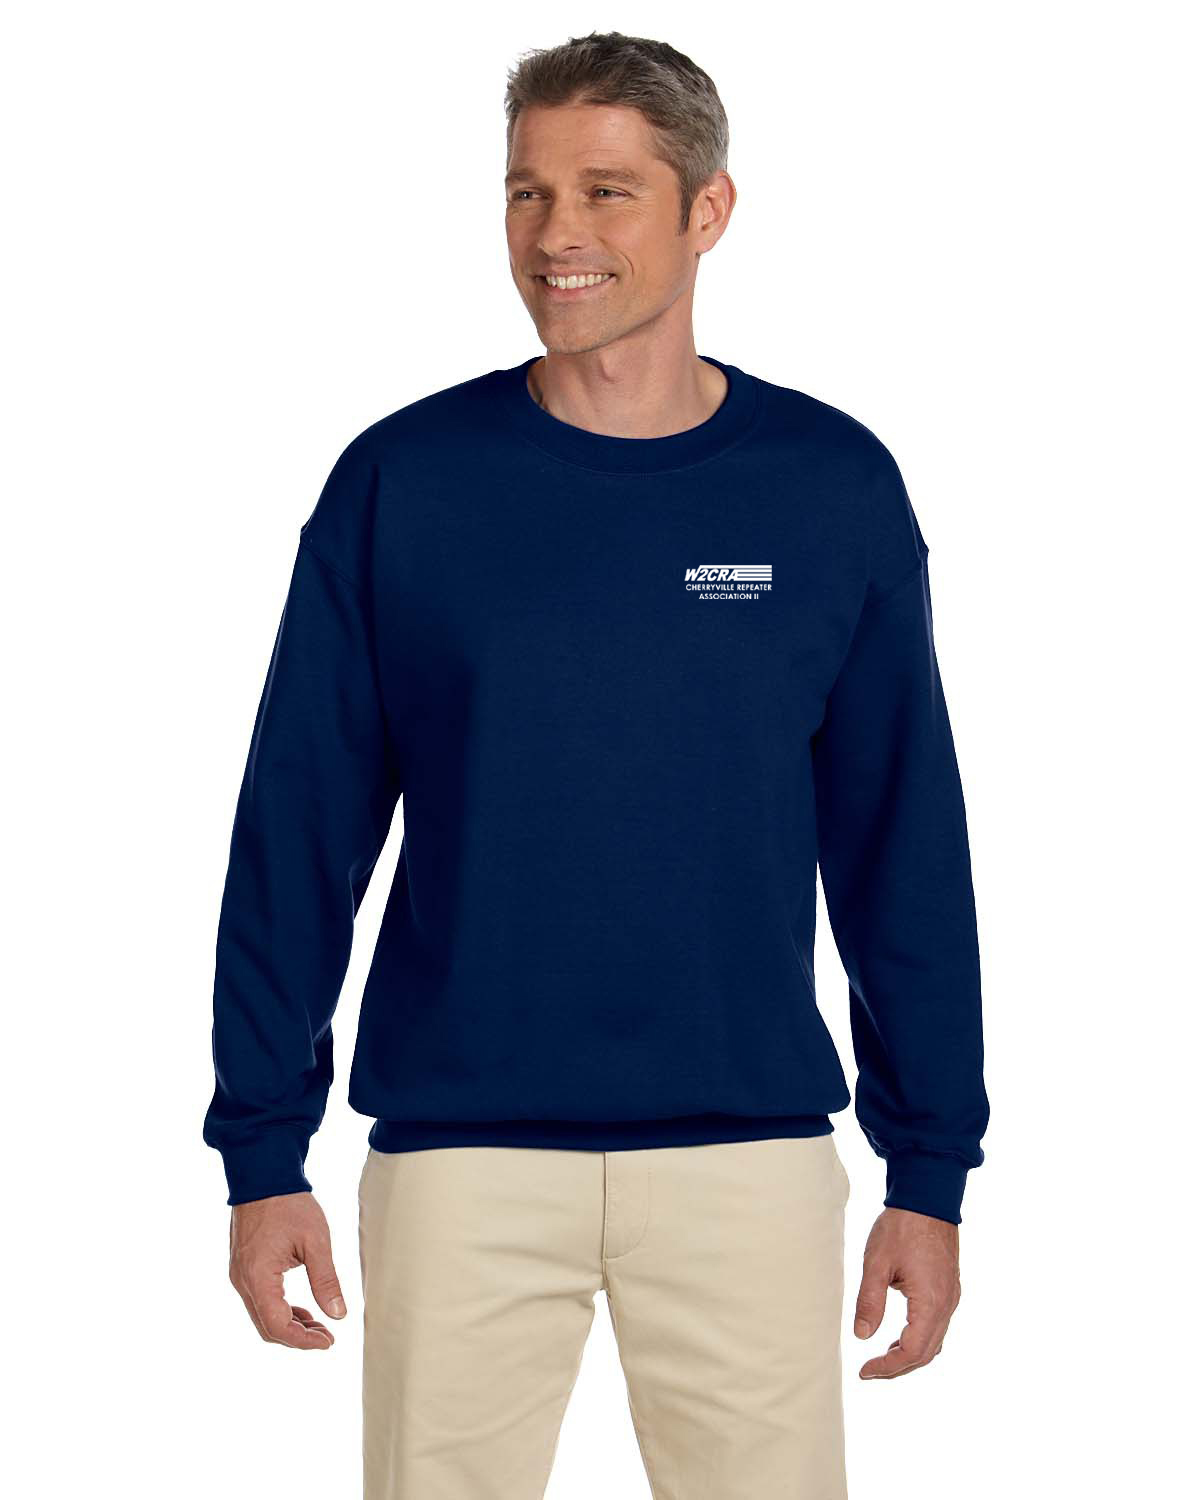 KSS180 Navy Crewneck Sweat Shirt with White Logo on Left Chest